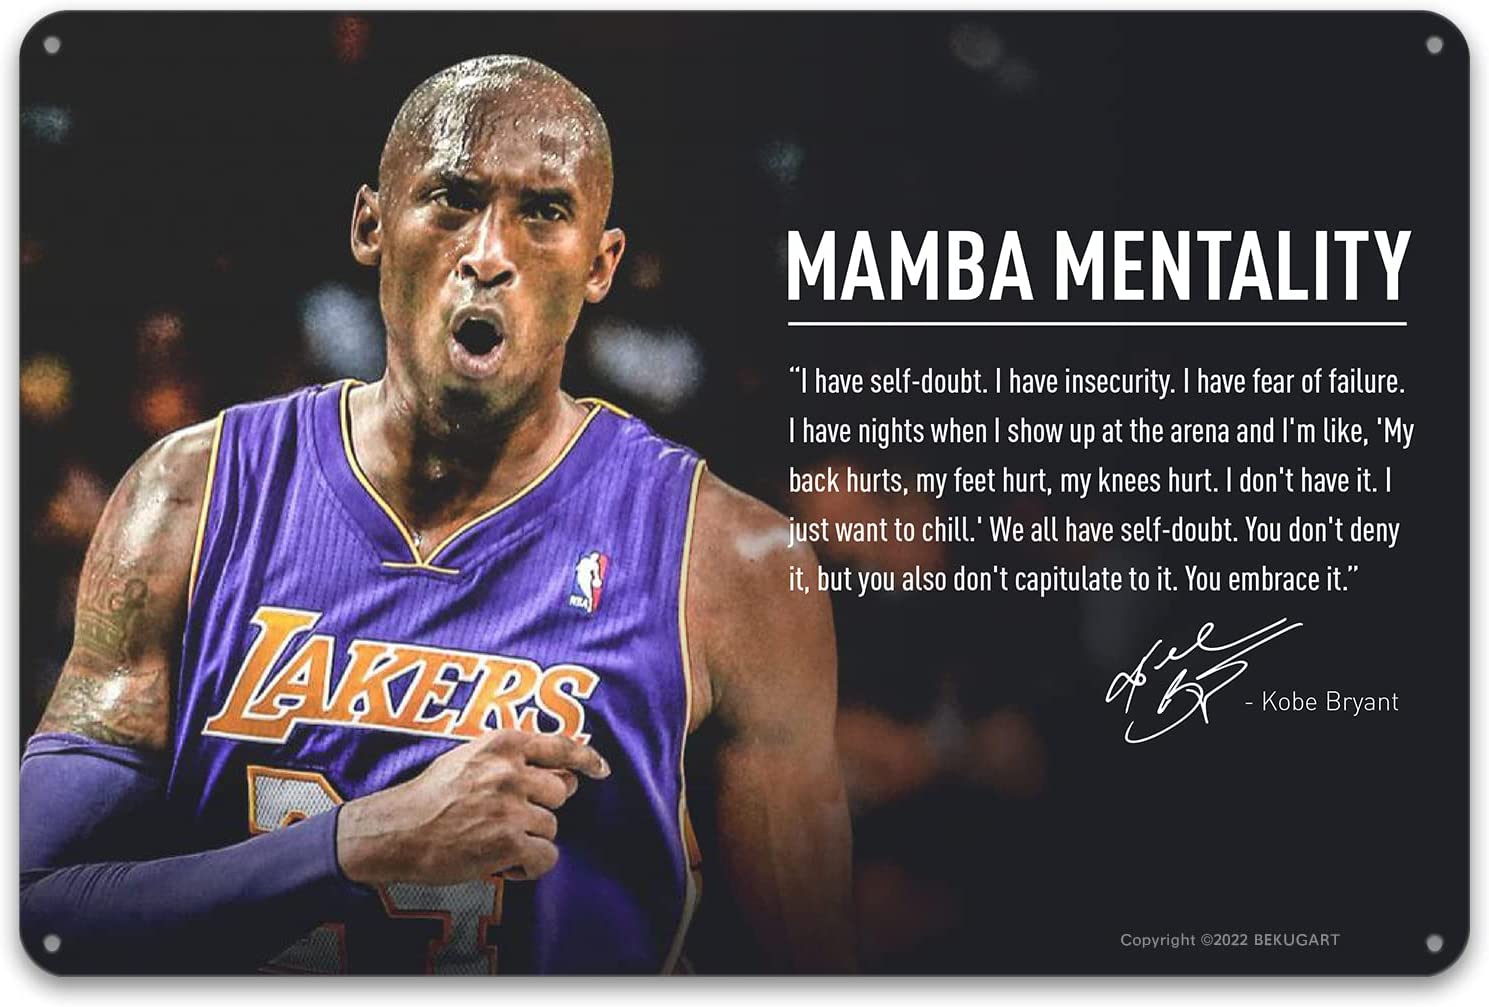 Kobe Bryant Quotes The MAMBA MENTALITY. Motivational Basketball Metal Sign Print Poster. Kobe Wall Art For Home Office Locker Room Gym Décor. Perfect Wall Art To Inspire Perseverance